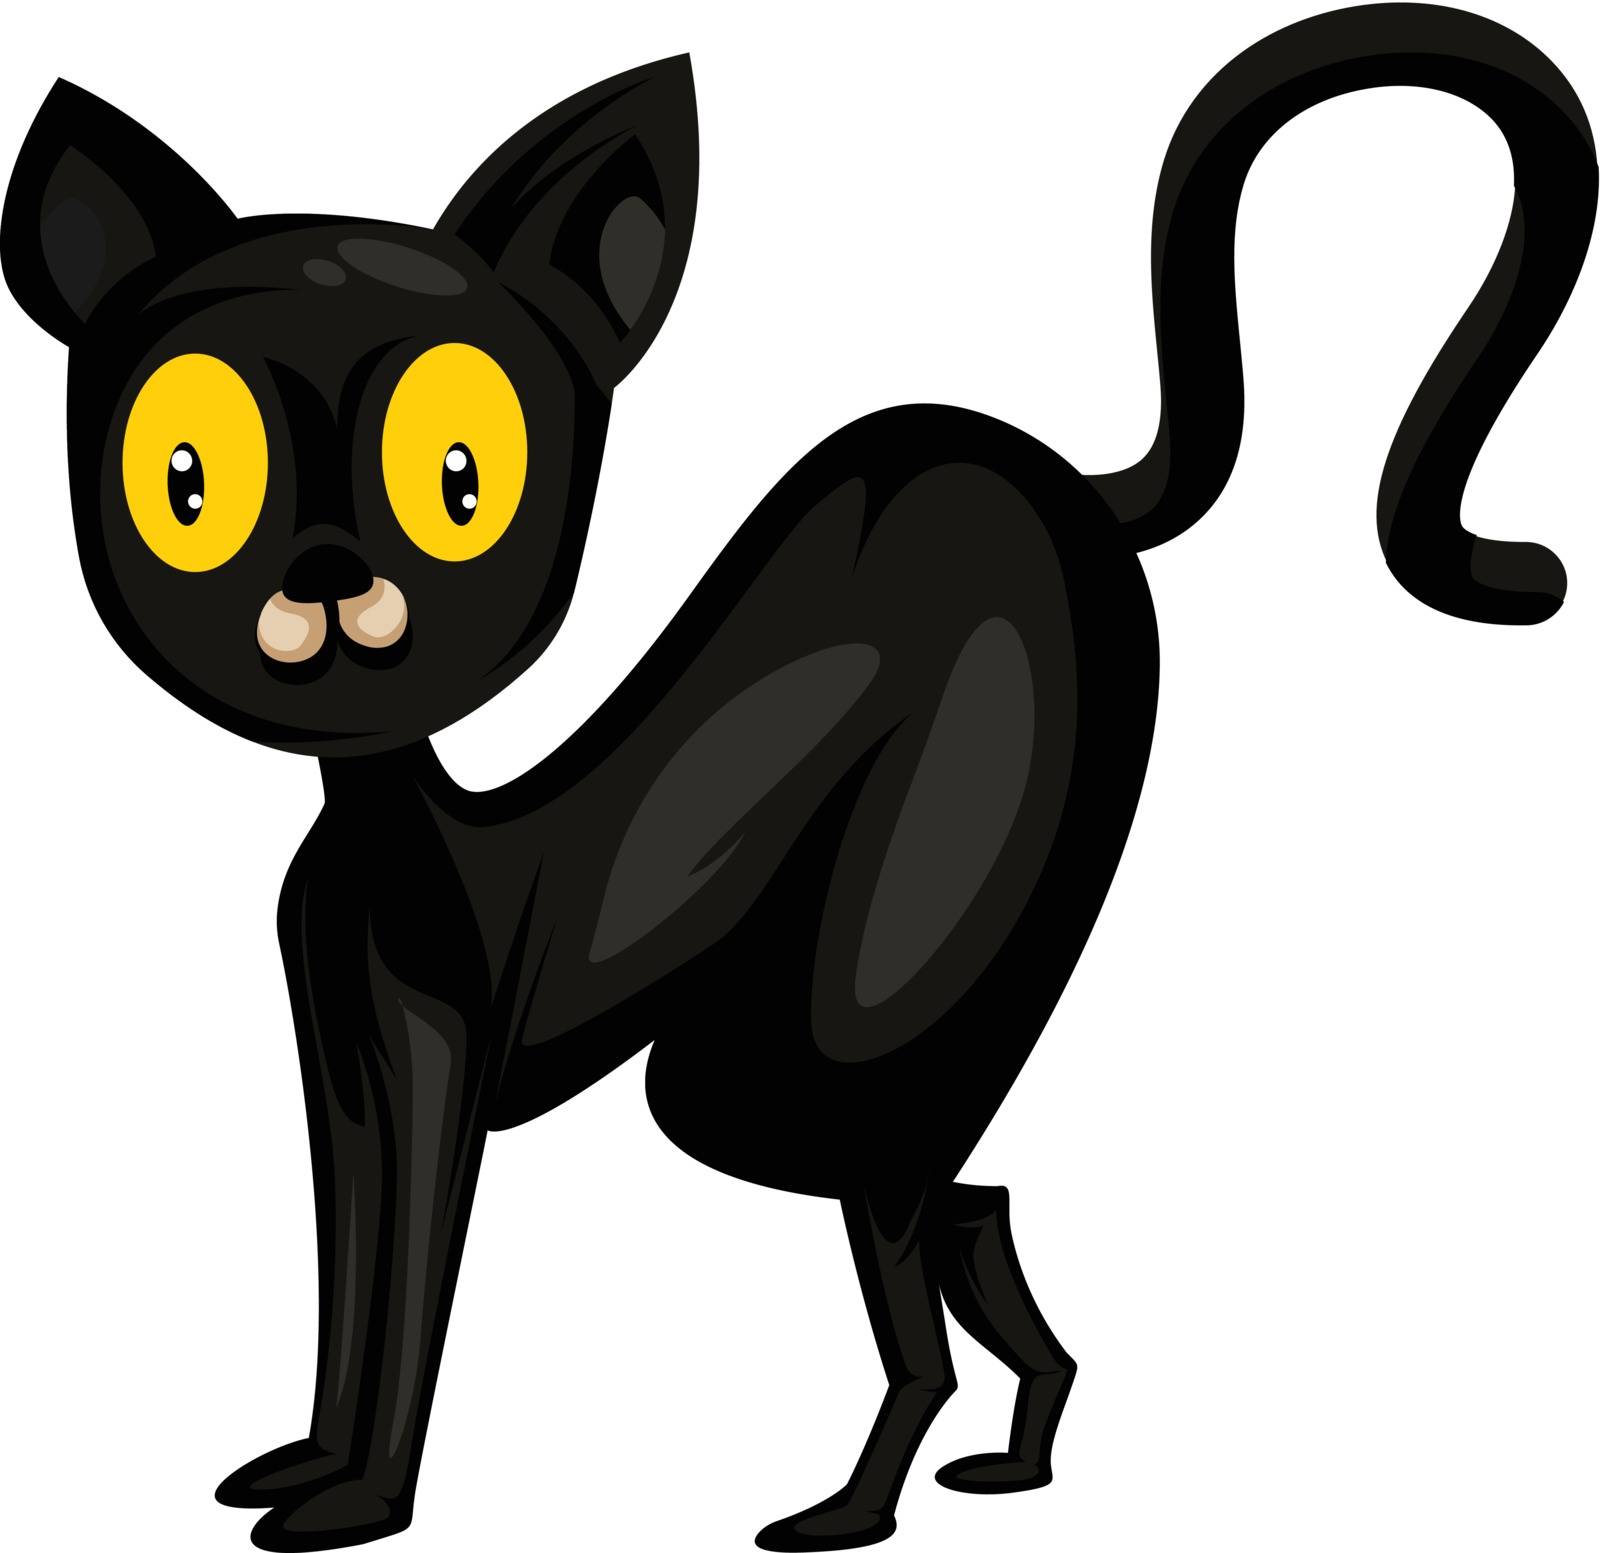 Black cat with big yellow eyes vector illustration on white back by Morphart